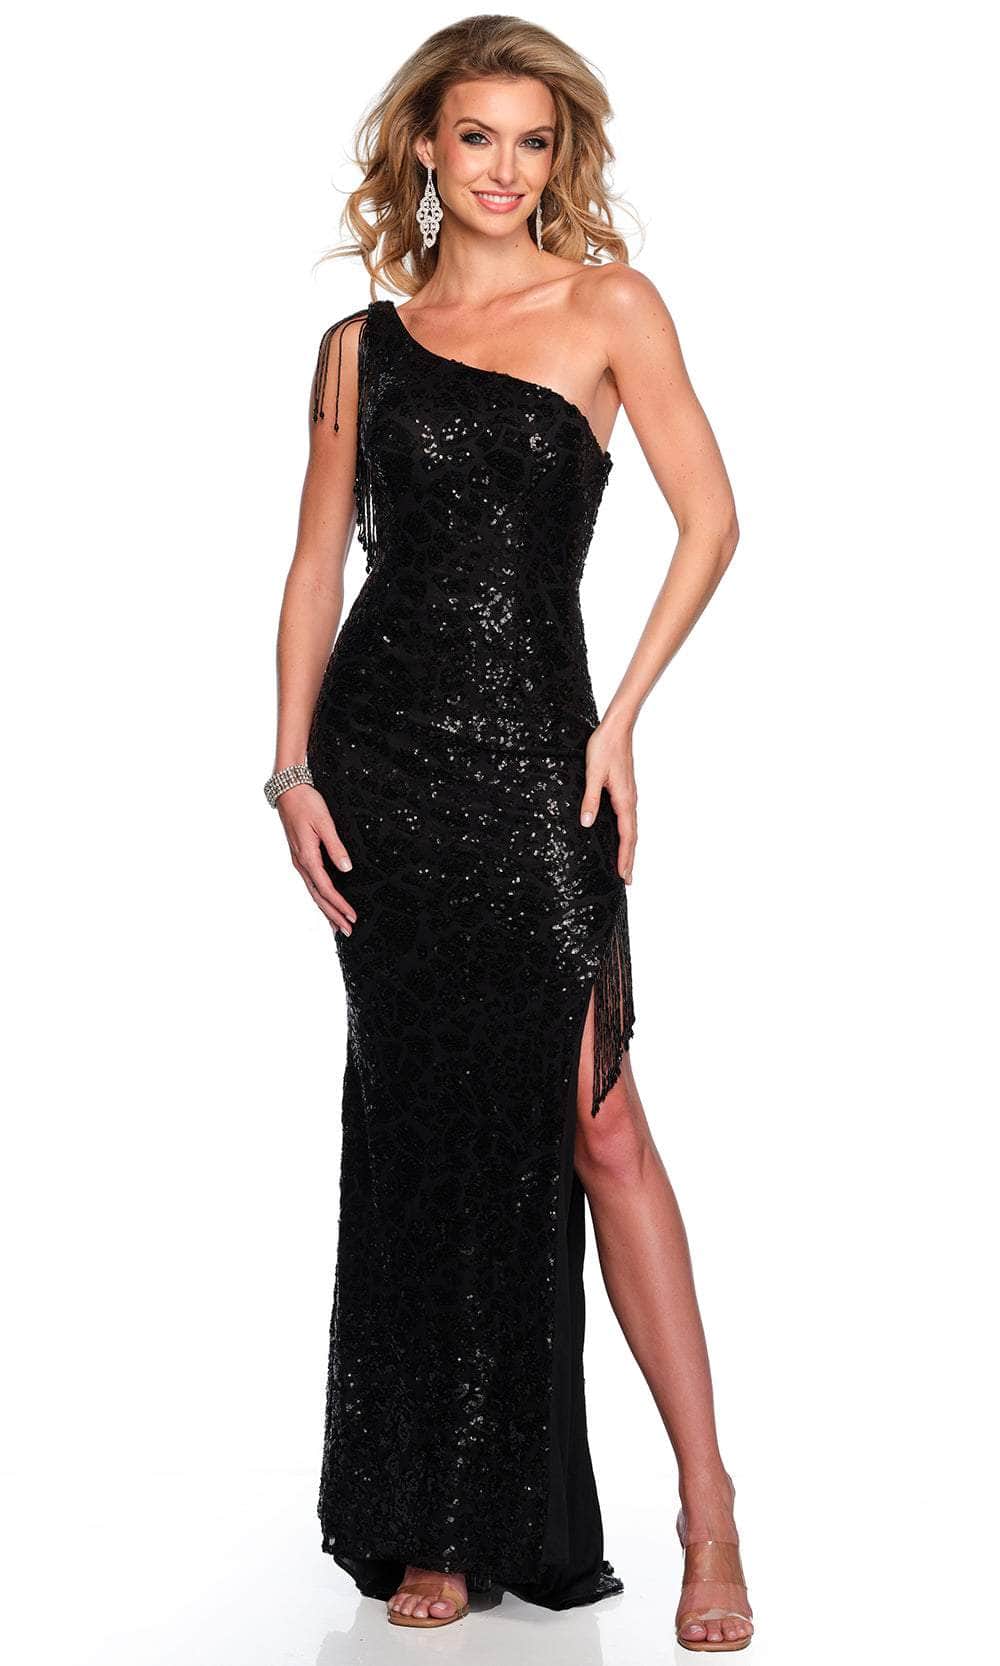 Dave & Johnny, Dave & Johnny 11433 - Sequin Asymmetrical Neck Evening Gown